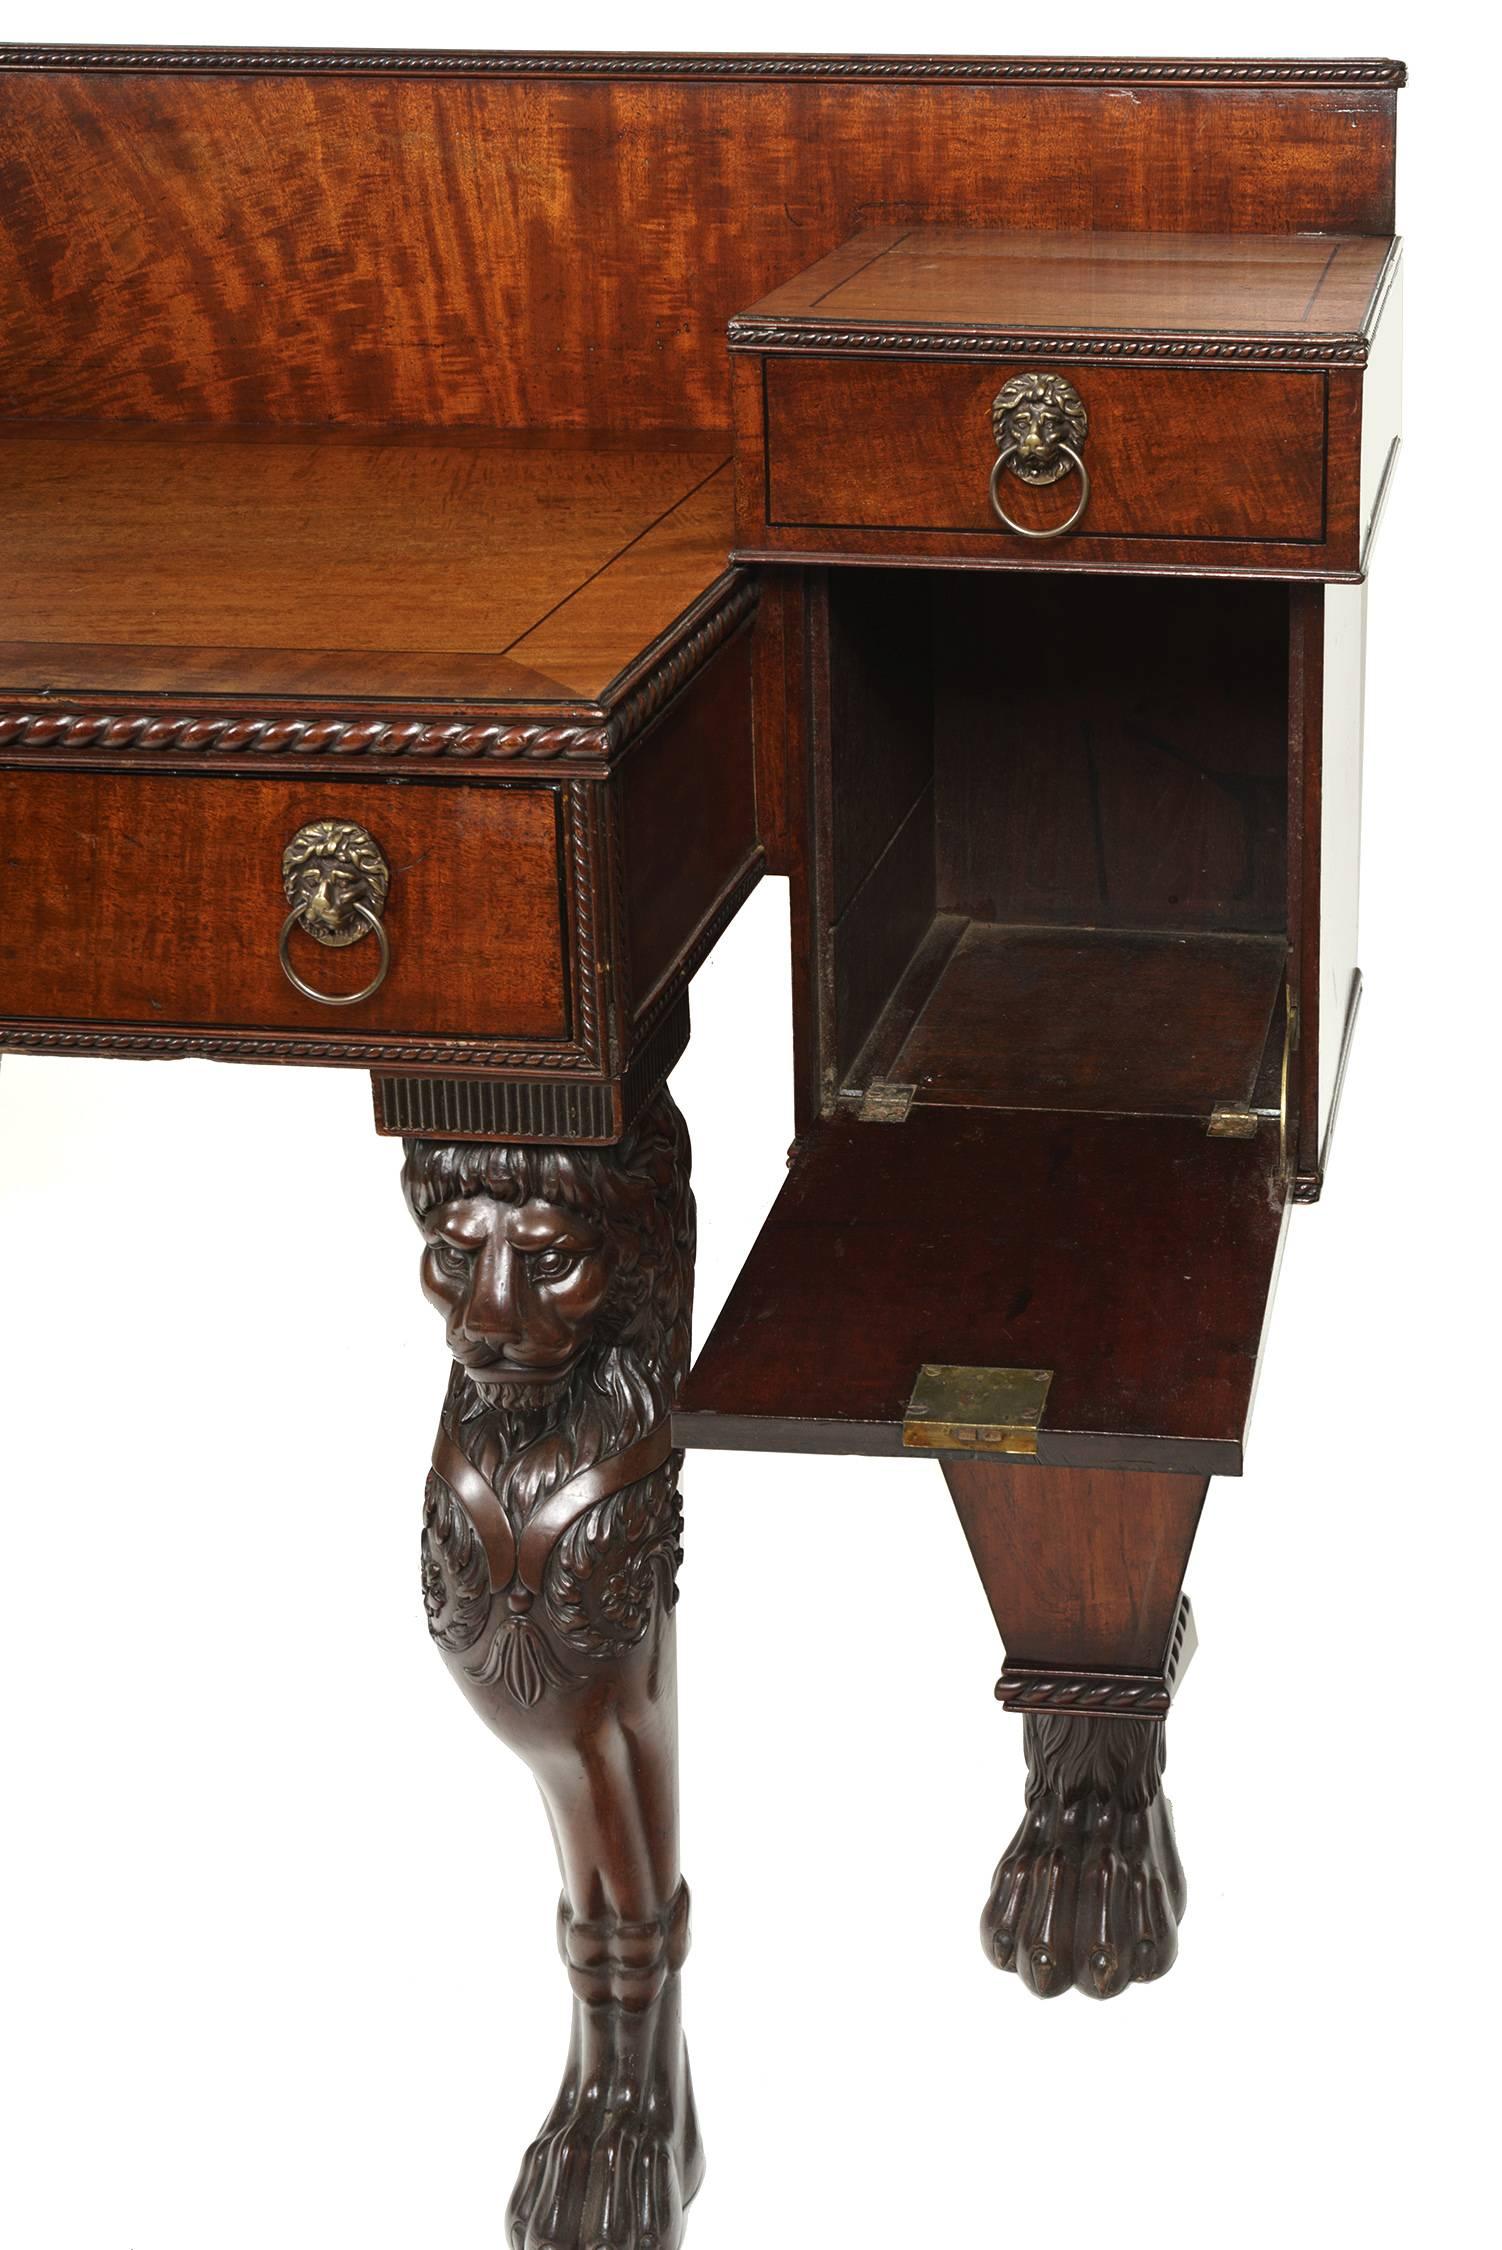 Mack, Williams and Gibton mahogany sideboard with lion monopodium legs. A fine Regency sideboard with a dropped center piece containing two drawers, flanked by downward-opening cabinets, each atop an inverted-pyramid leg and lion's paw foot.